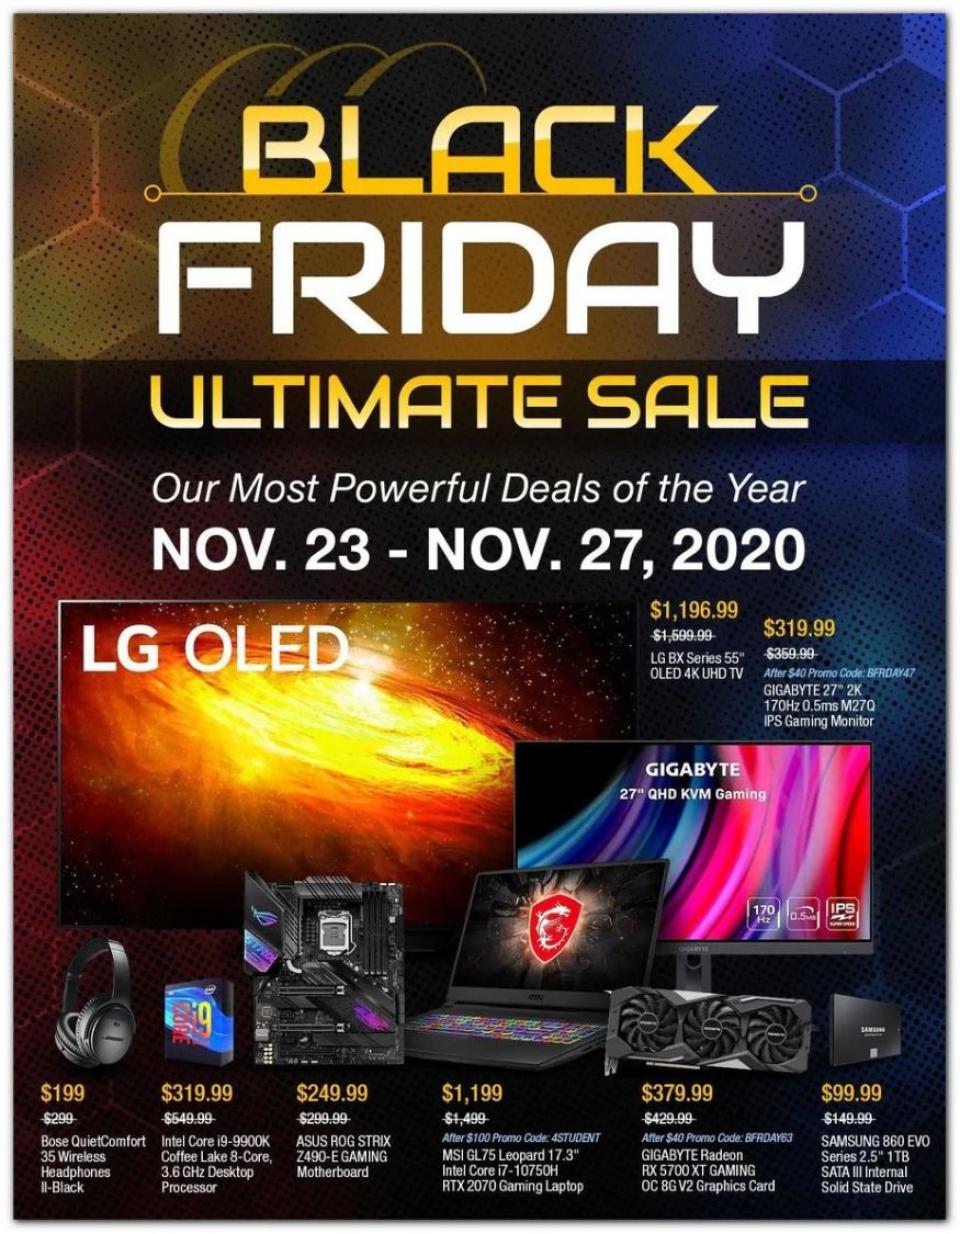 Newegg Black Friday Ad 2020 Ultimate Sale - WeeklyAds2 - When To Black Friday Deals End